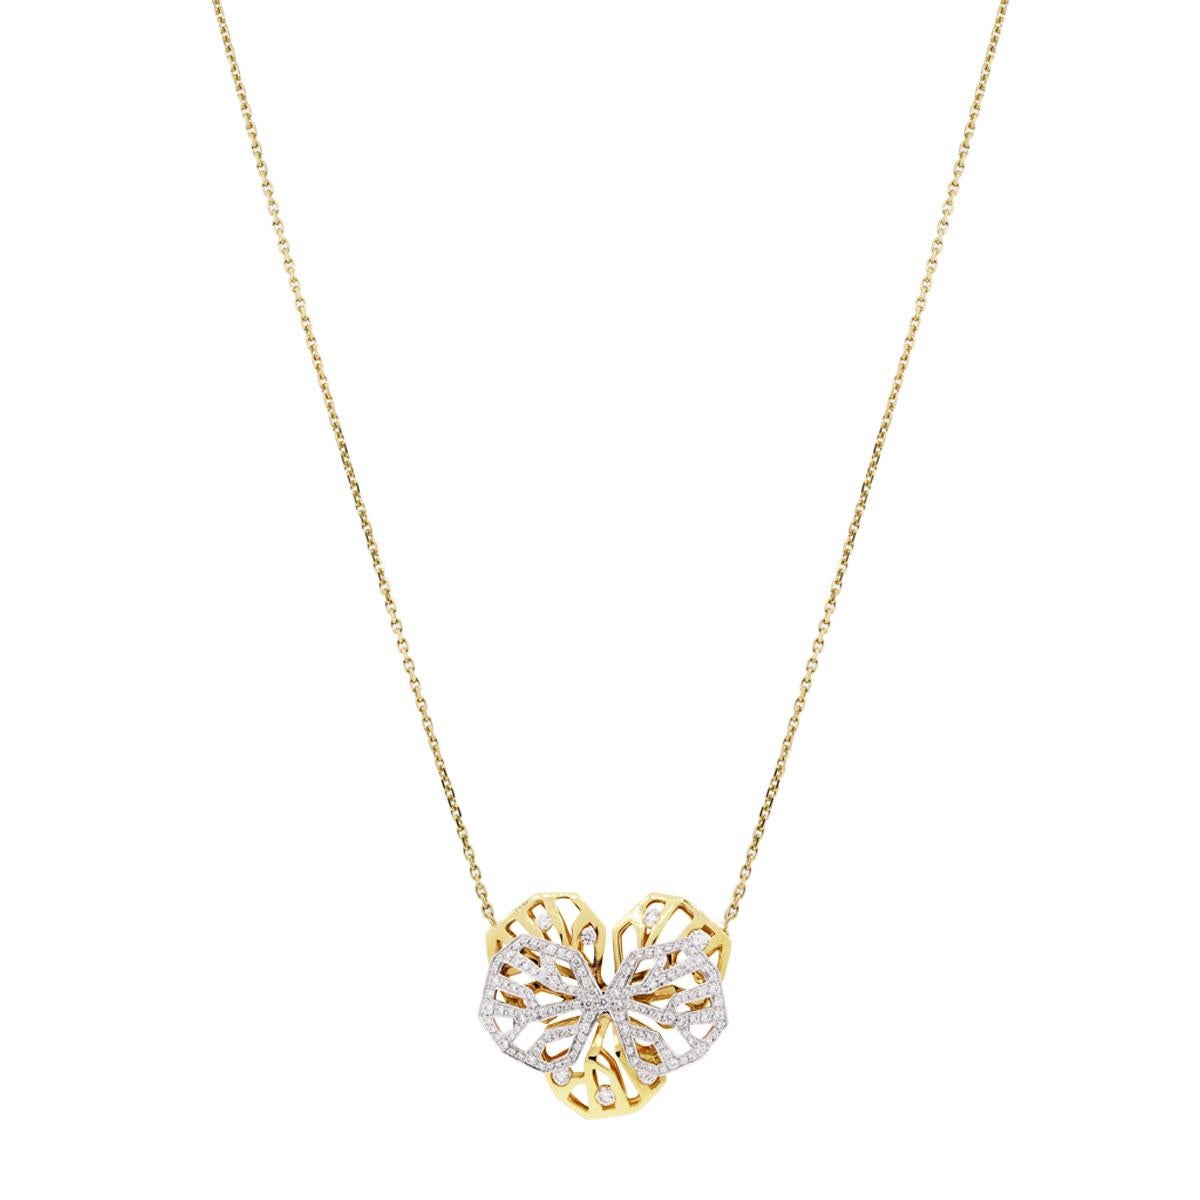 Designer: Cartier
Style: Caresse D'orchidees 18k Two Tone Gold Necklace
Length: 15.5